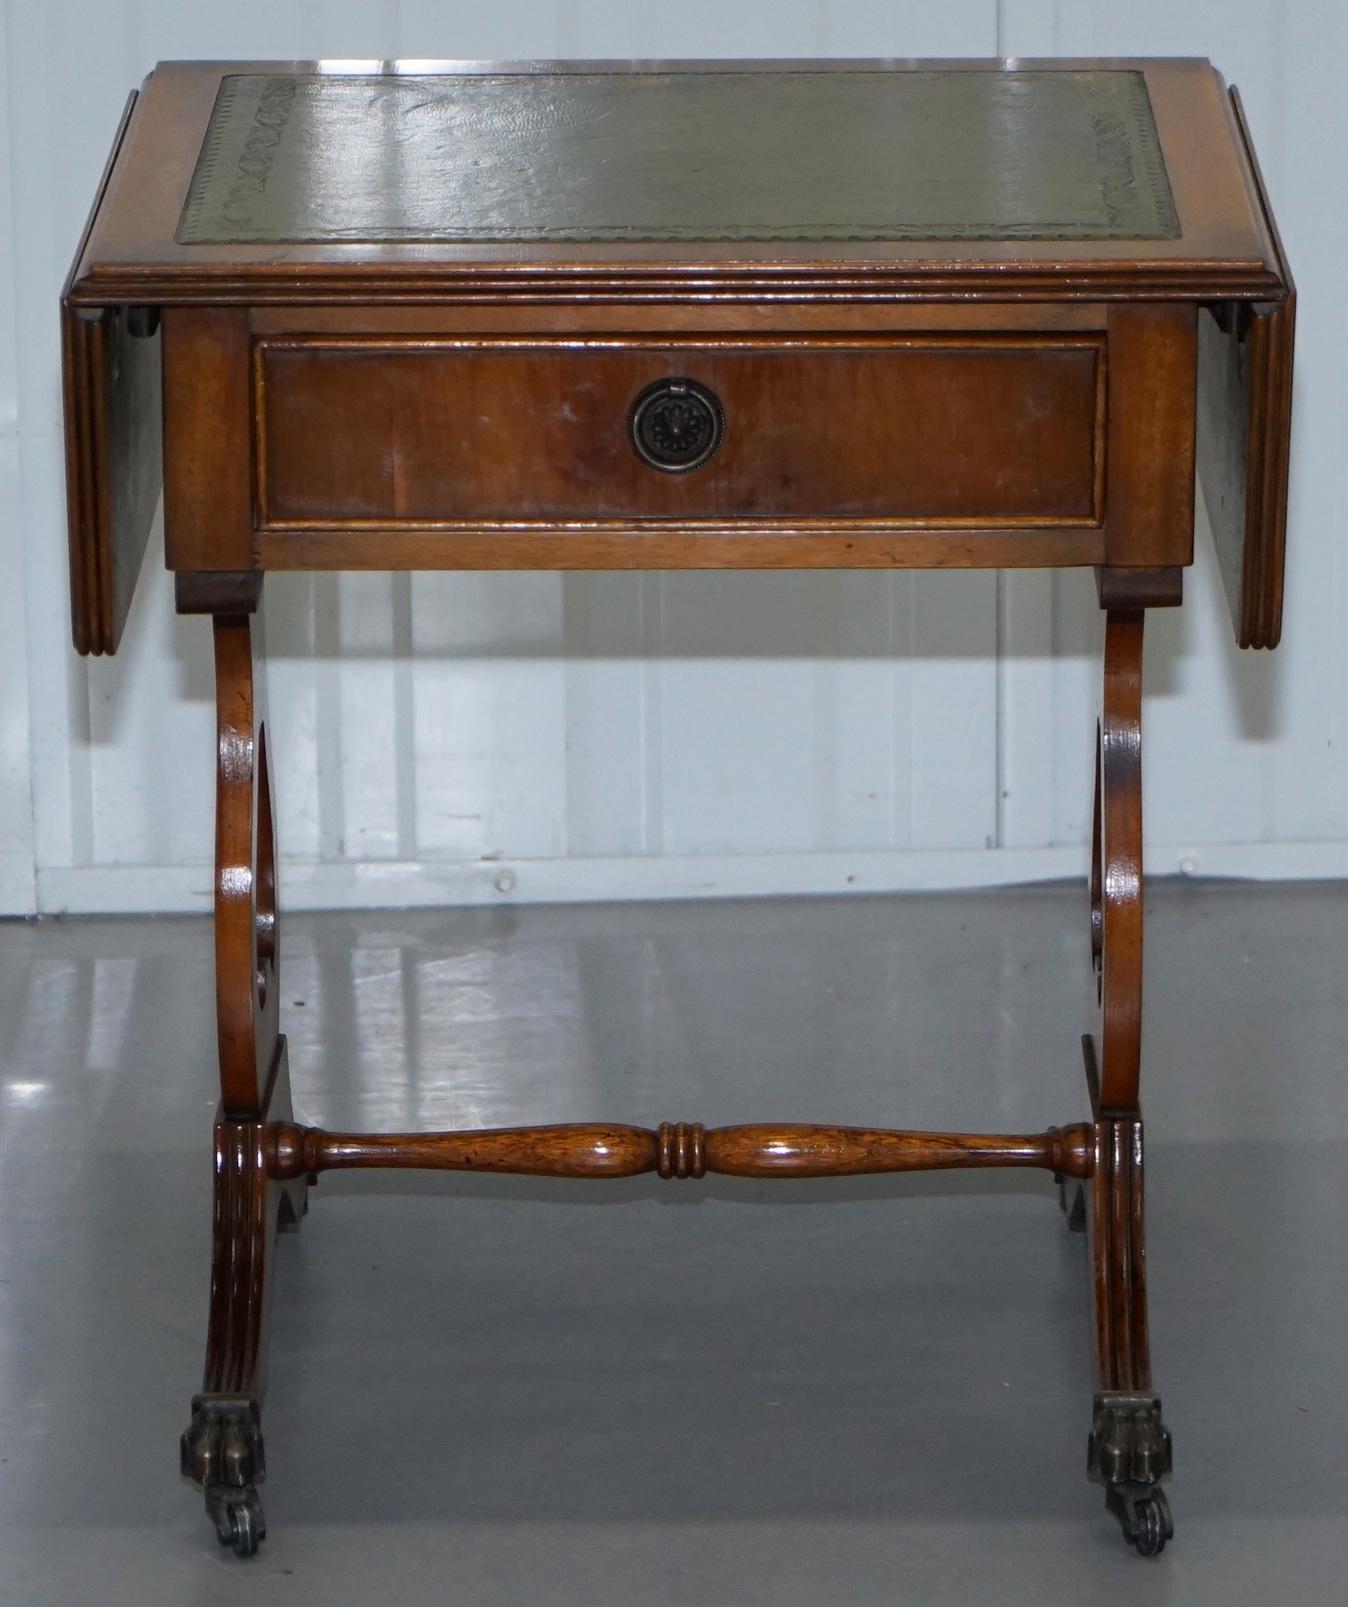 We are delighted to offer for sale this lovely small Bevan Funnell vintage mahogany side table with extending top twin drawers and green leather top

A very good looking and versatile piece, the table has single drawer to the front and false